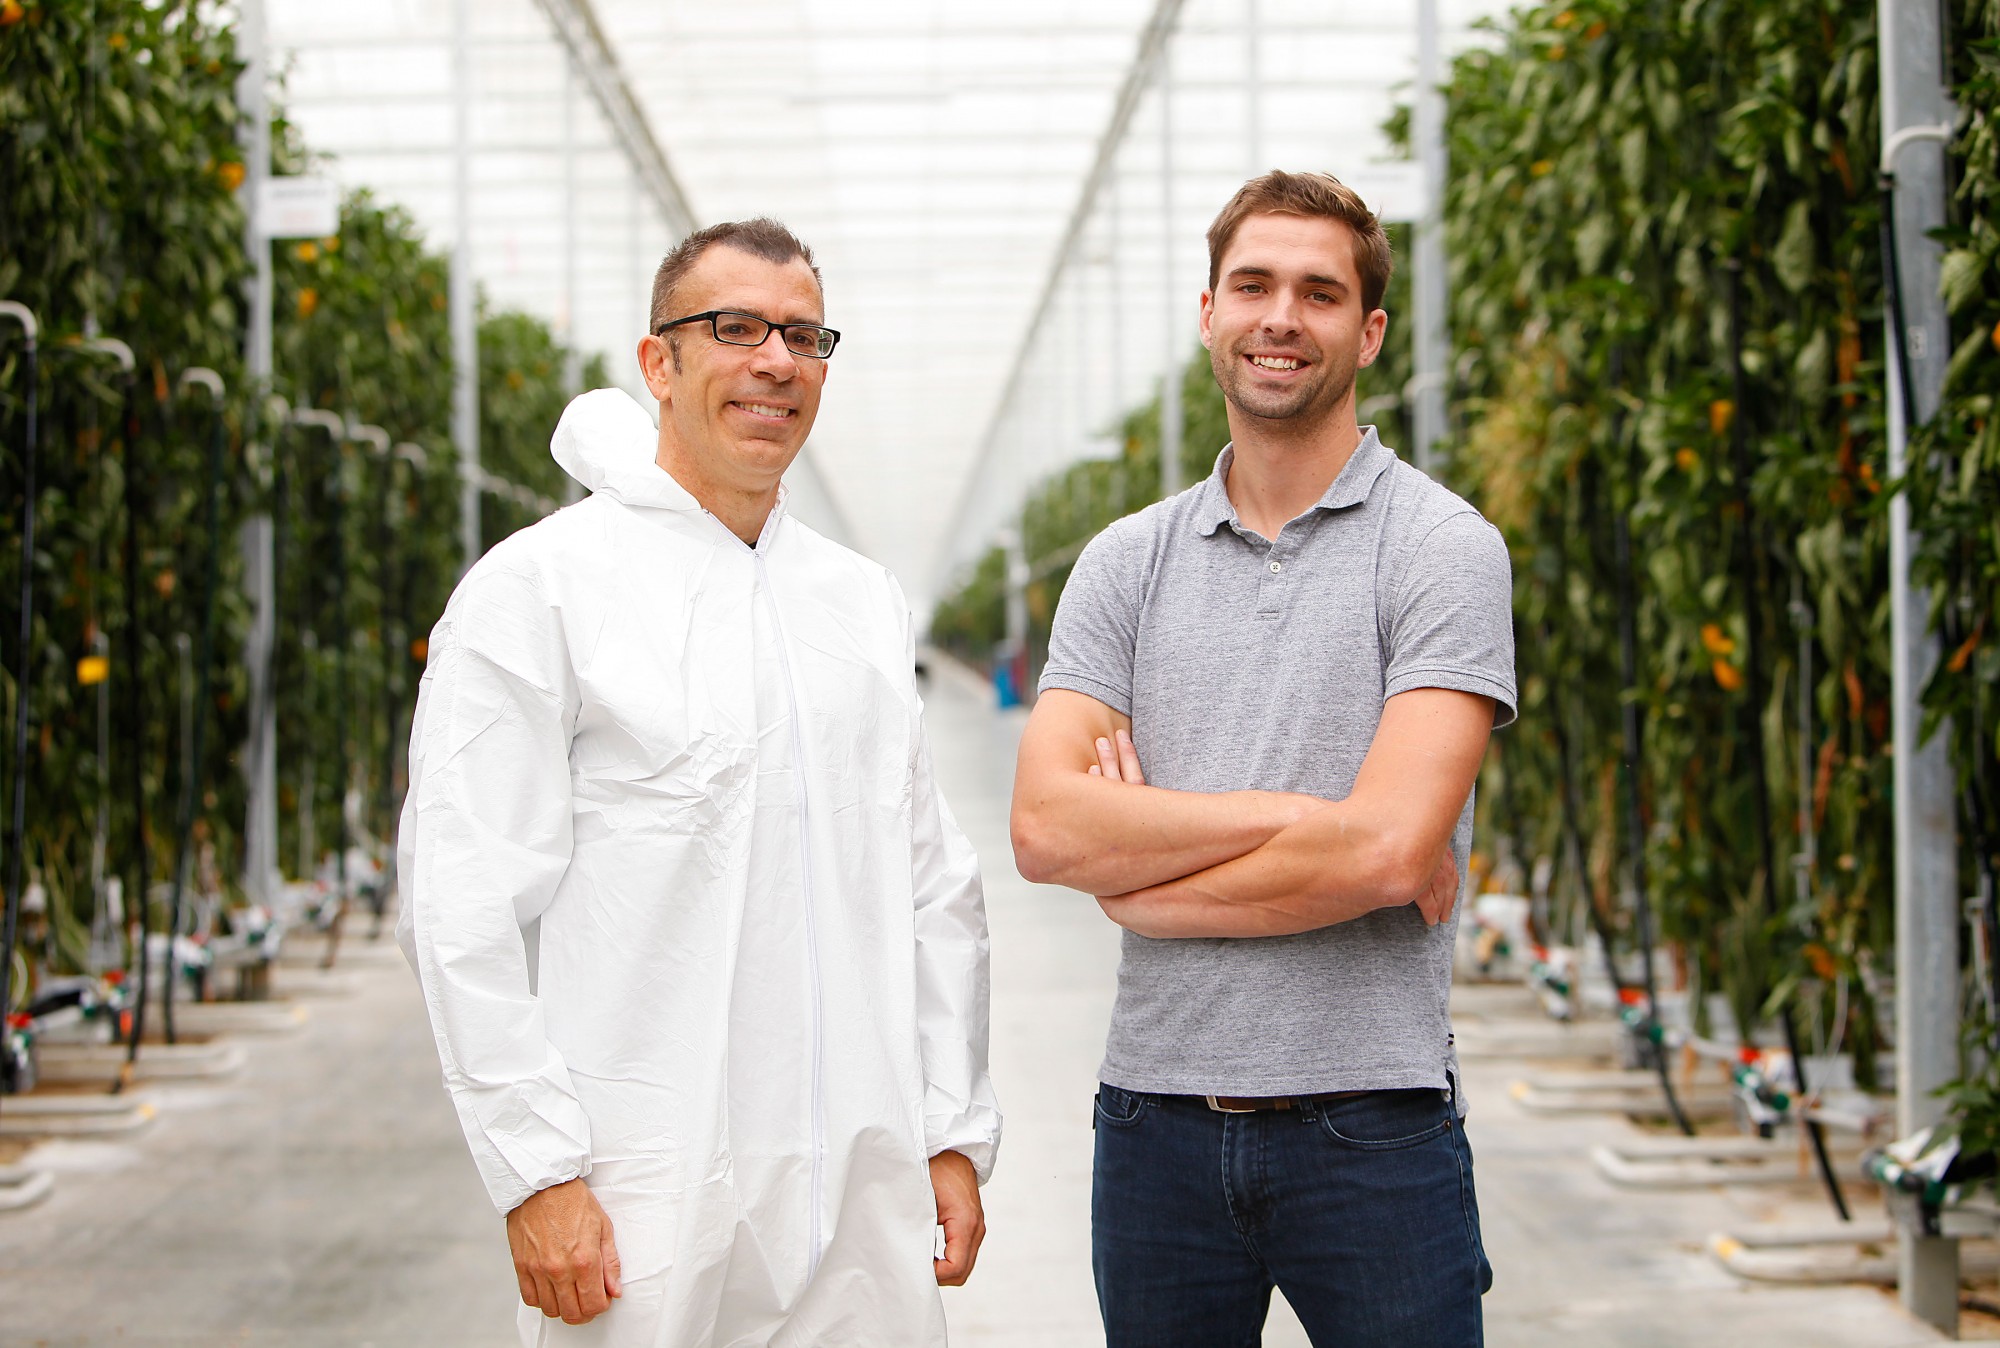 Dr. Rupp Carriveau (L) and Lucas Semple (R) are pictured at an Under Sun Acres greenhouse.